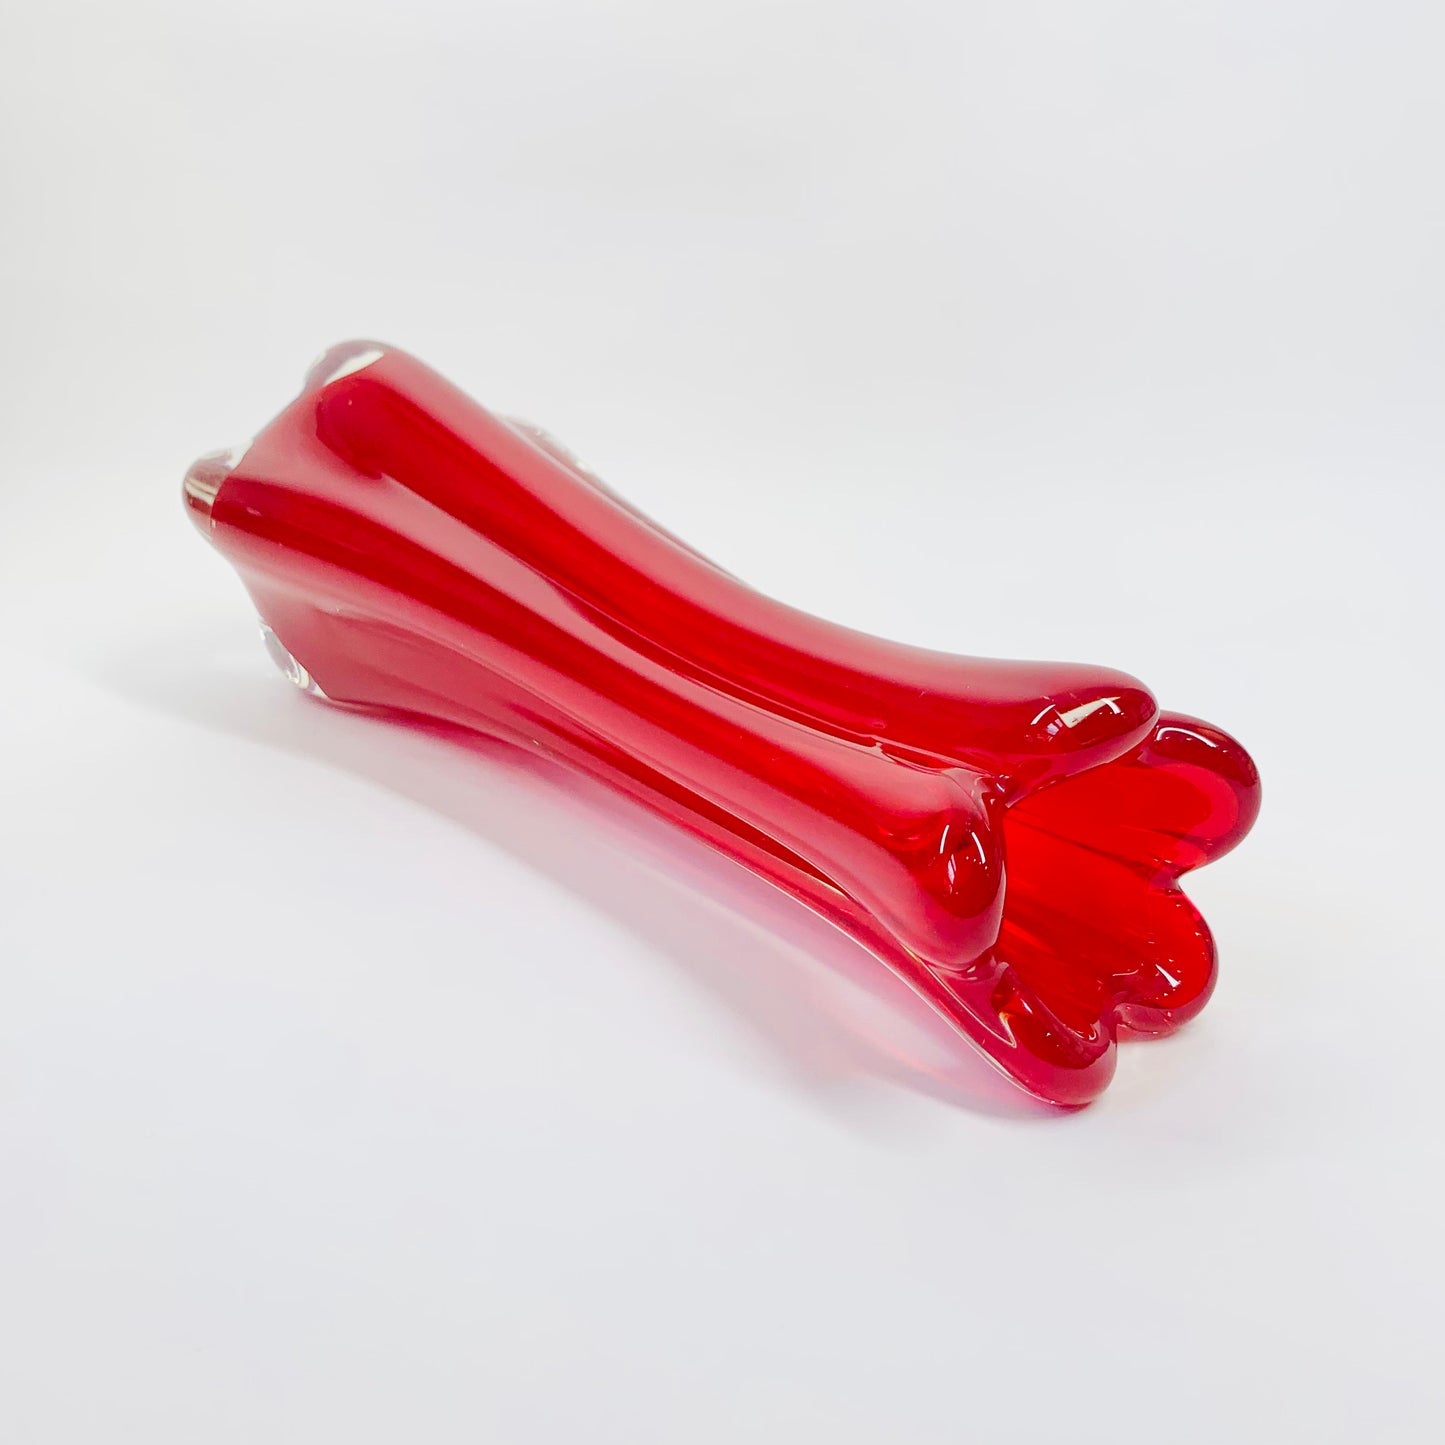 RED SWUNG VASE